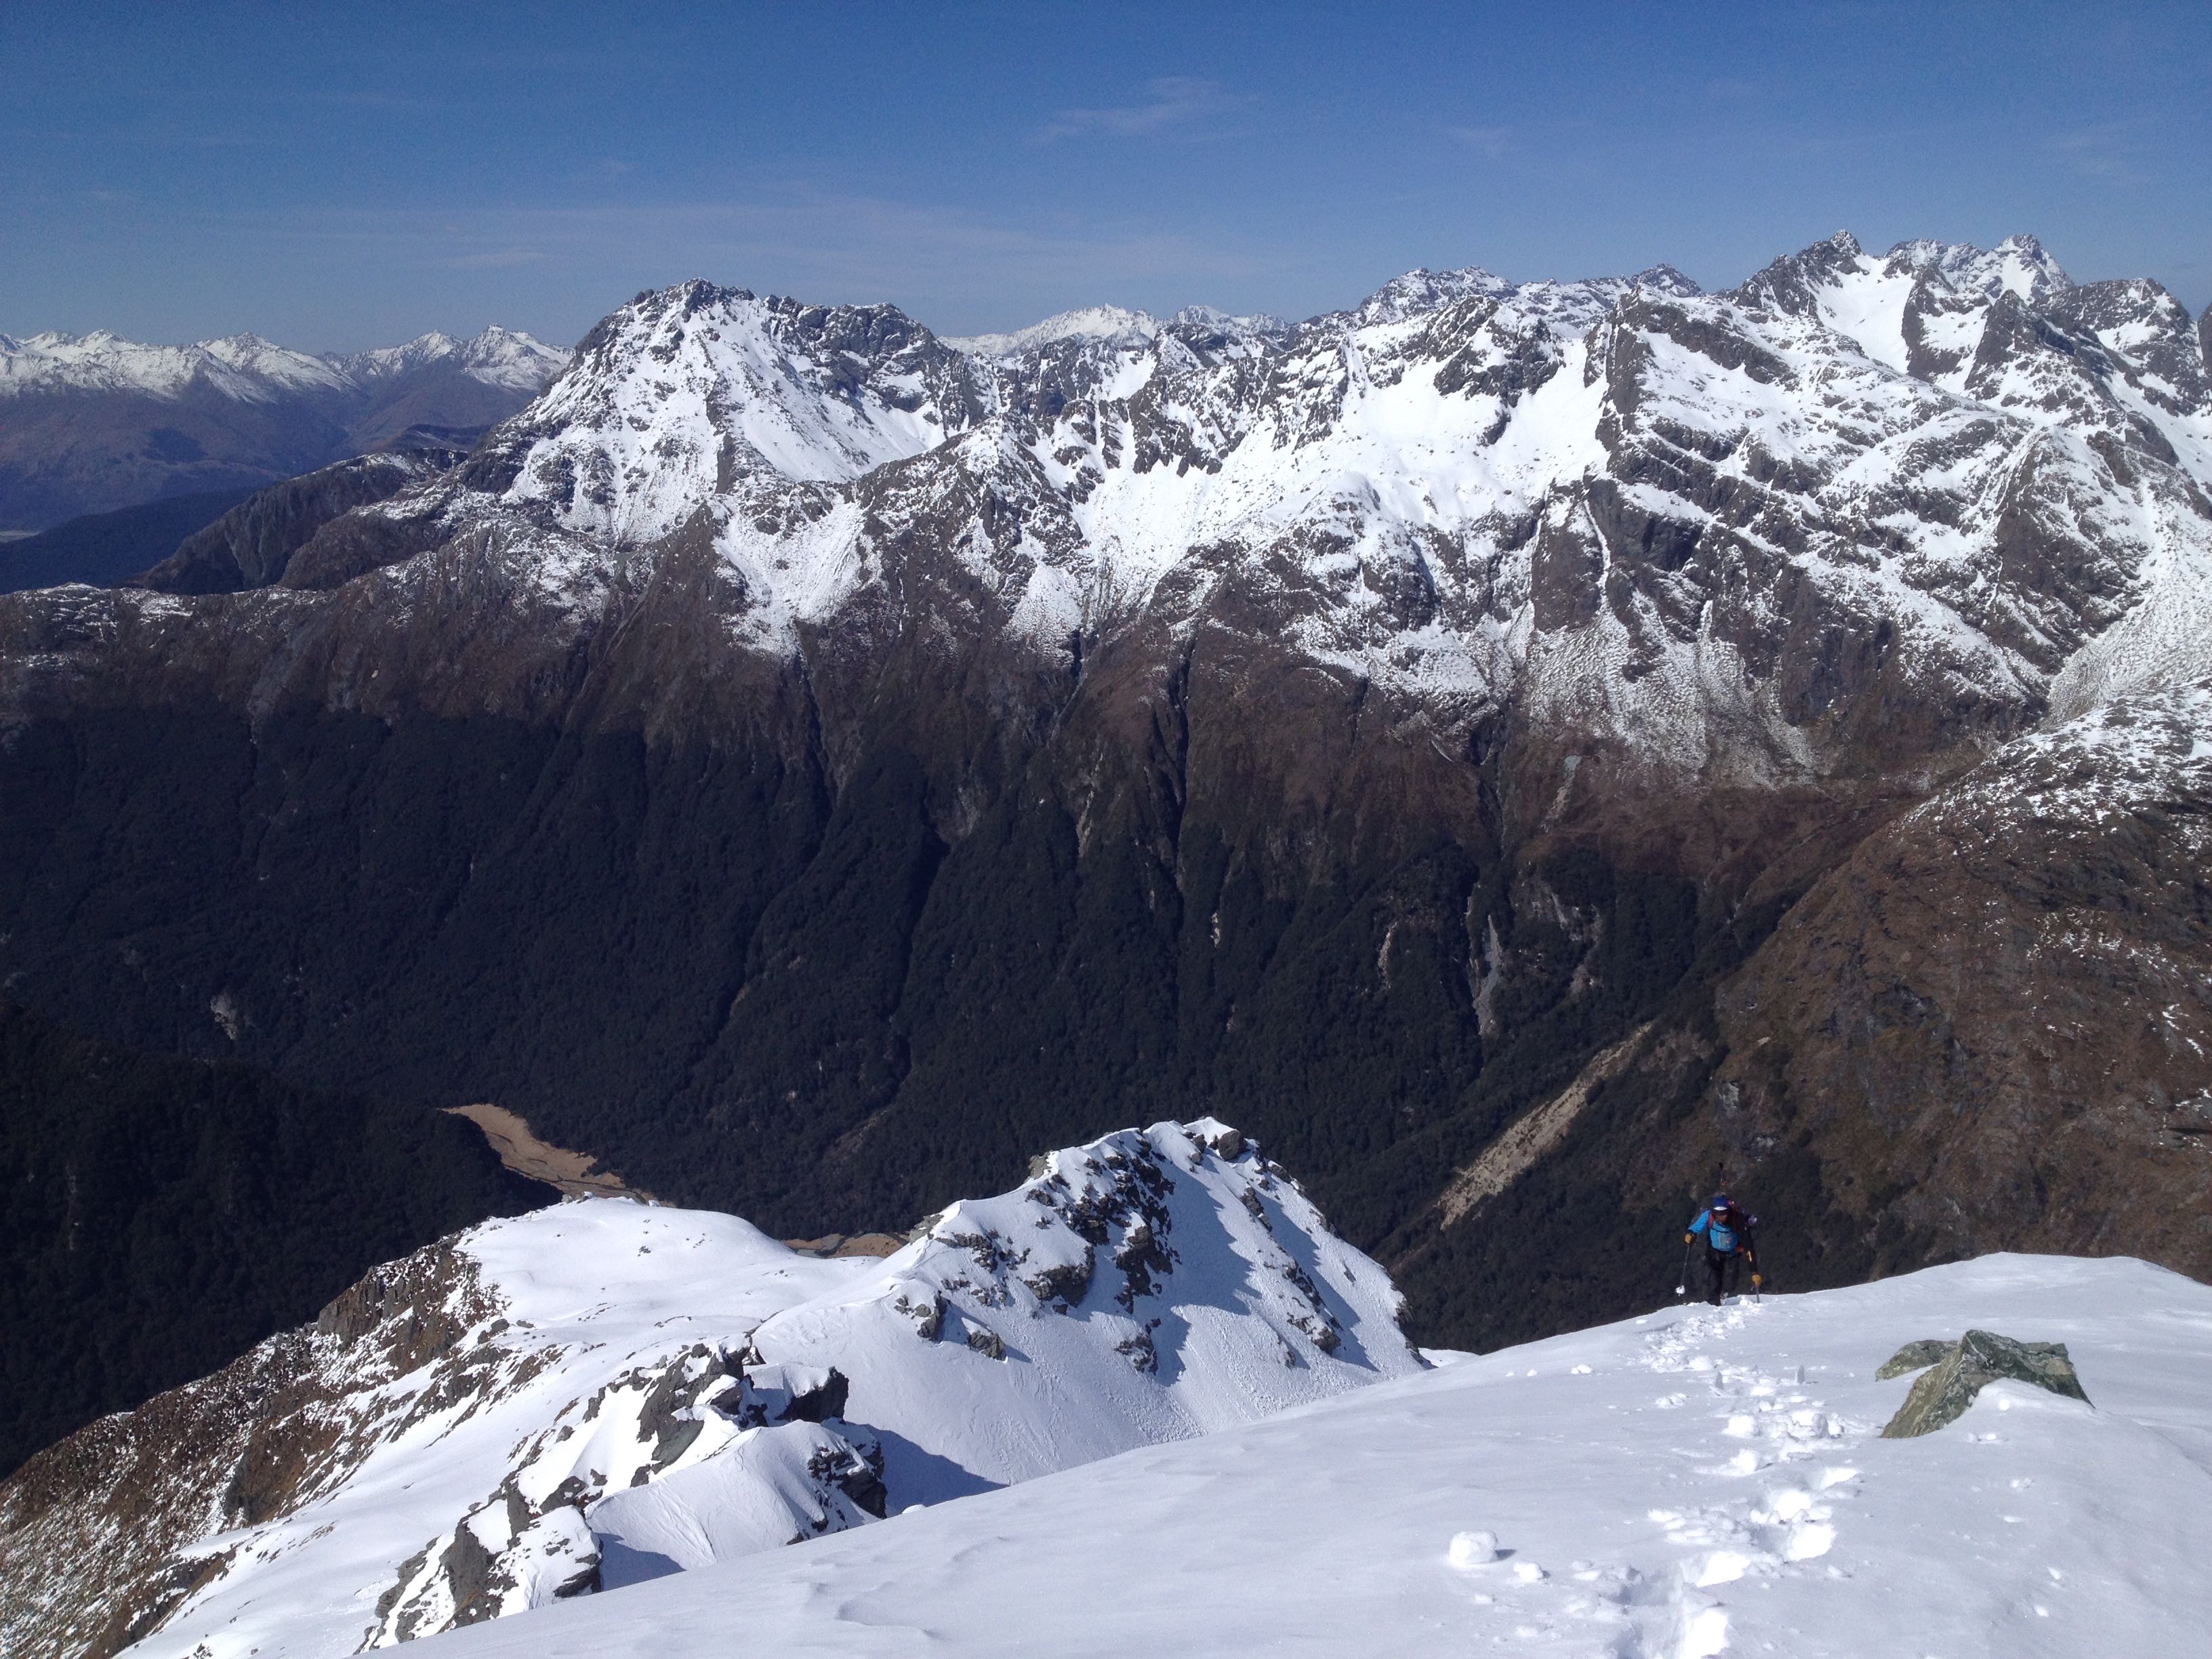 Ski touring in the Routeburn area of New Zealand